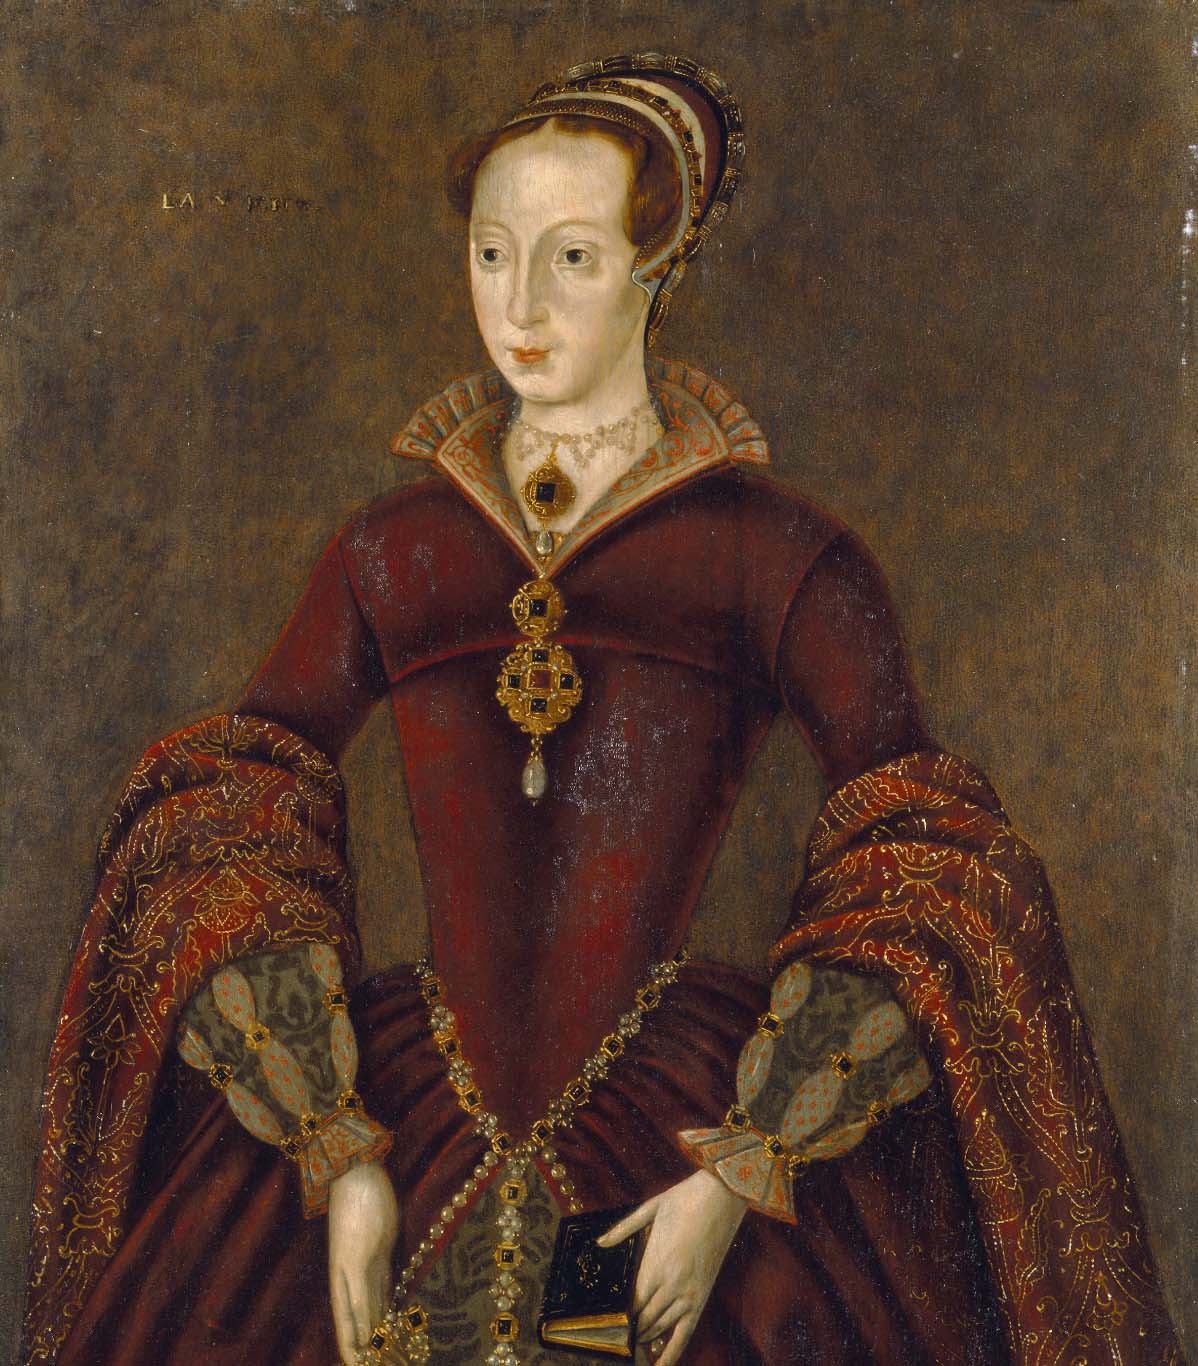 English Royalty - Lady Jane Grey, Queen of England